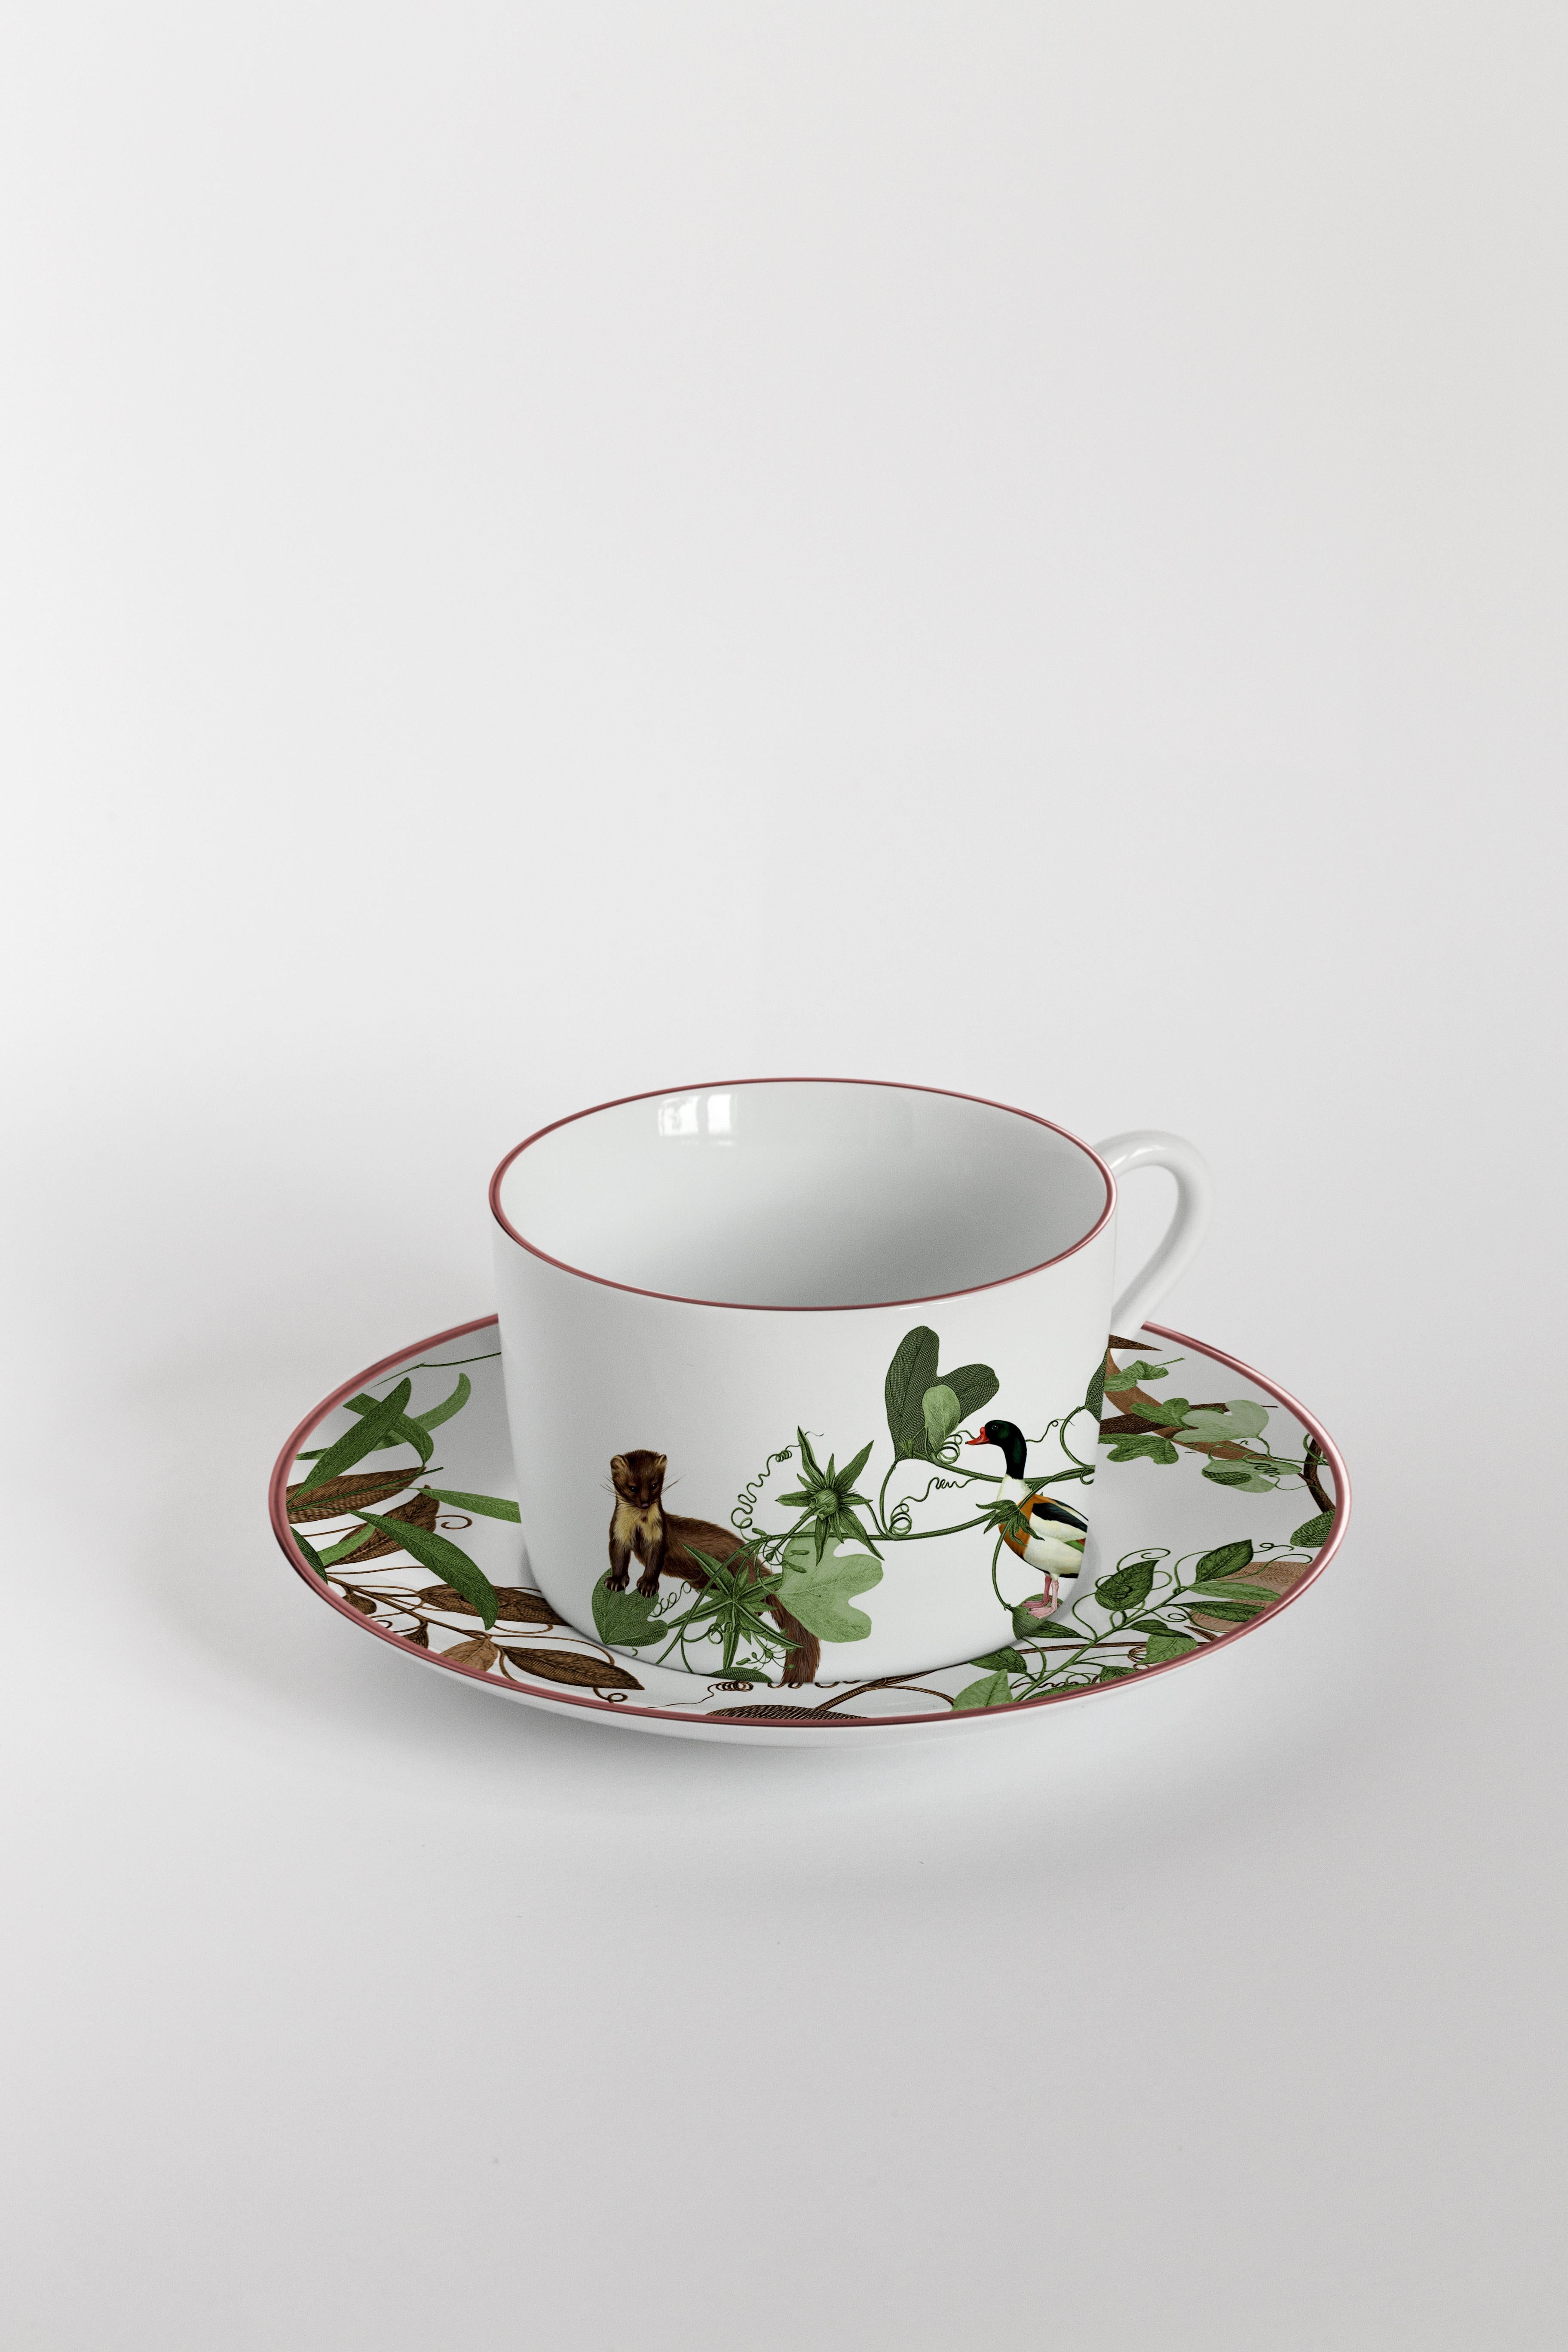 Inspired by the highest mountain of the Alps, the Mont Blanc, this collection of plates is a photography of the changing seasons. Winter is here and all the animals of the woods are enjoying the glazing air, playing hide and seek among the